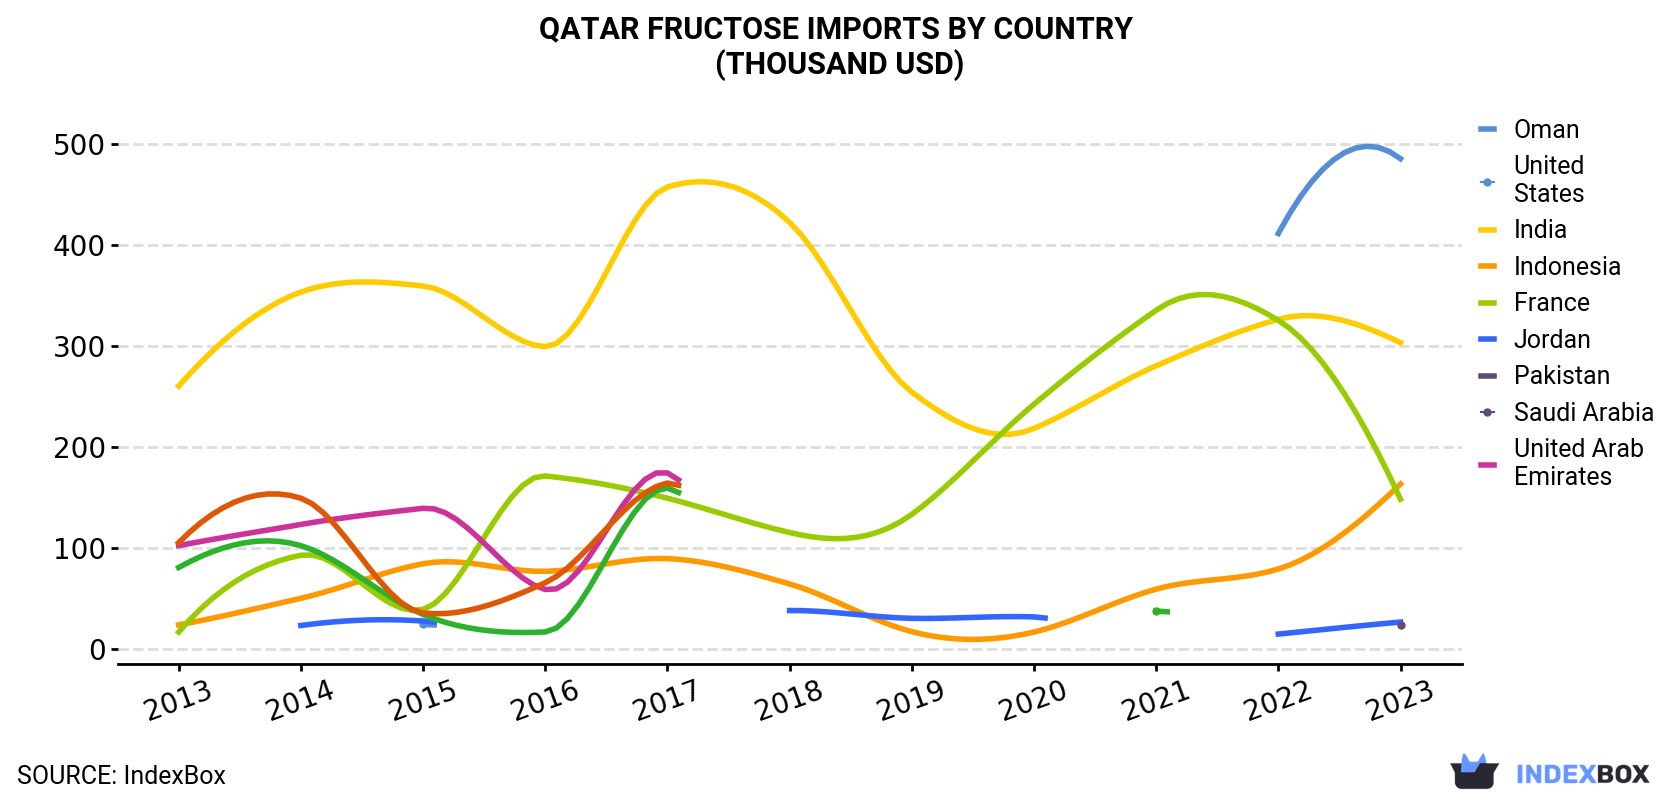 Qatar Fructose Imports By Country (Thousand USD)